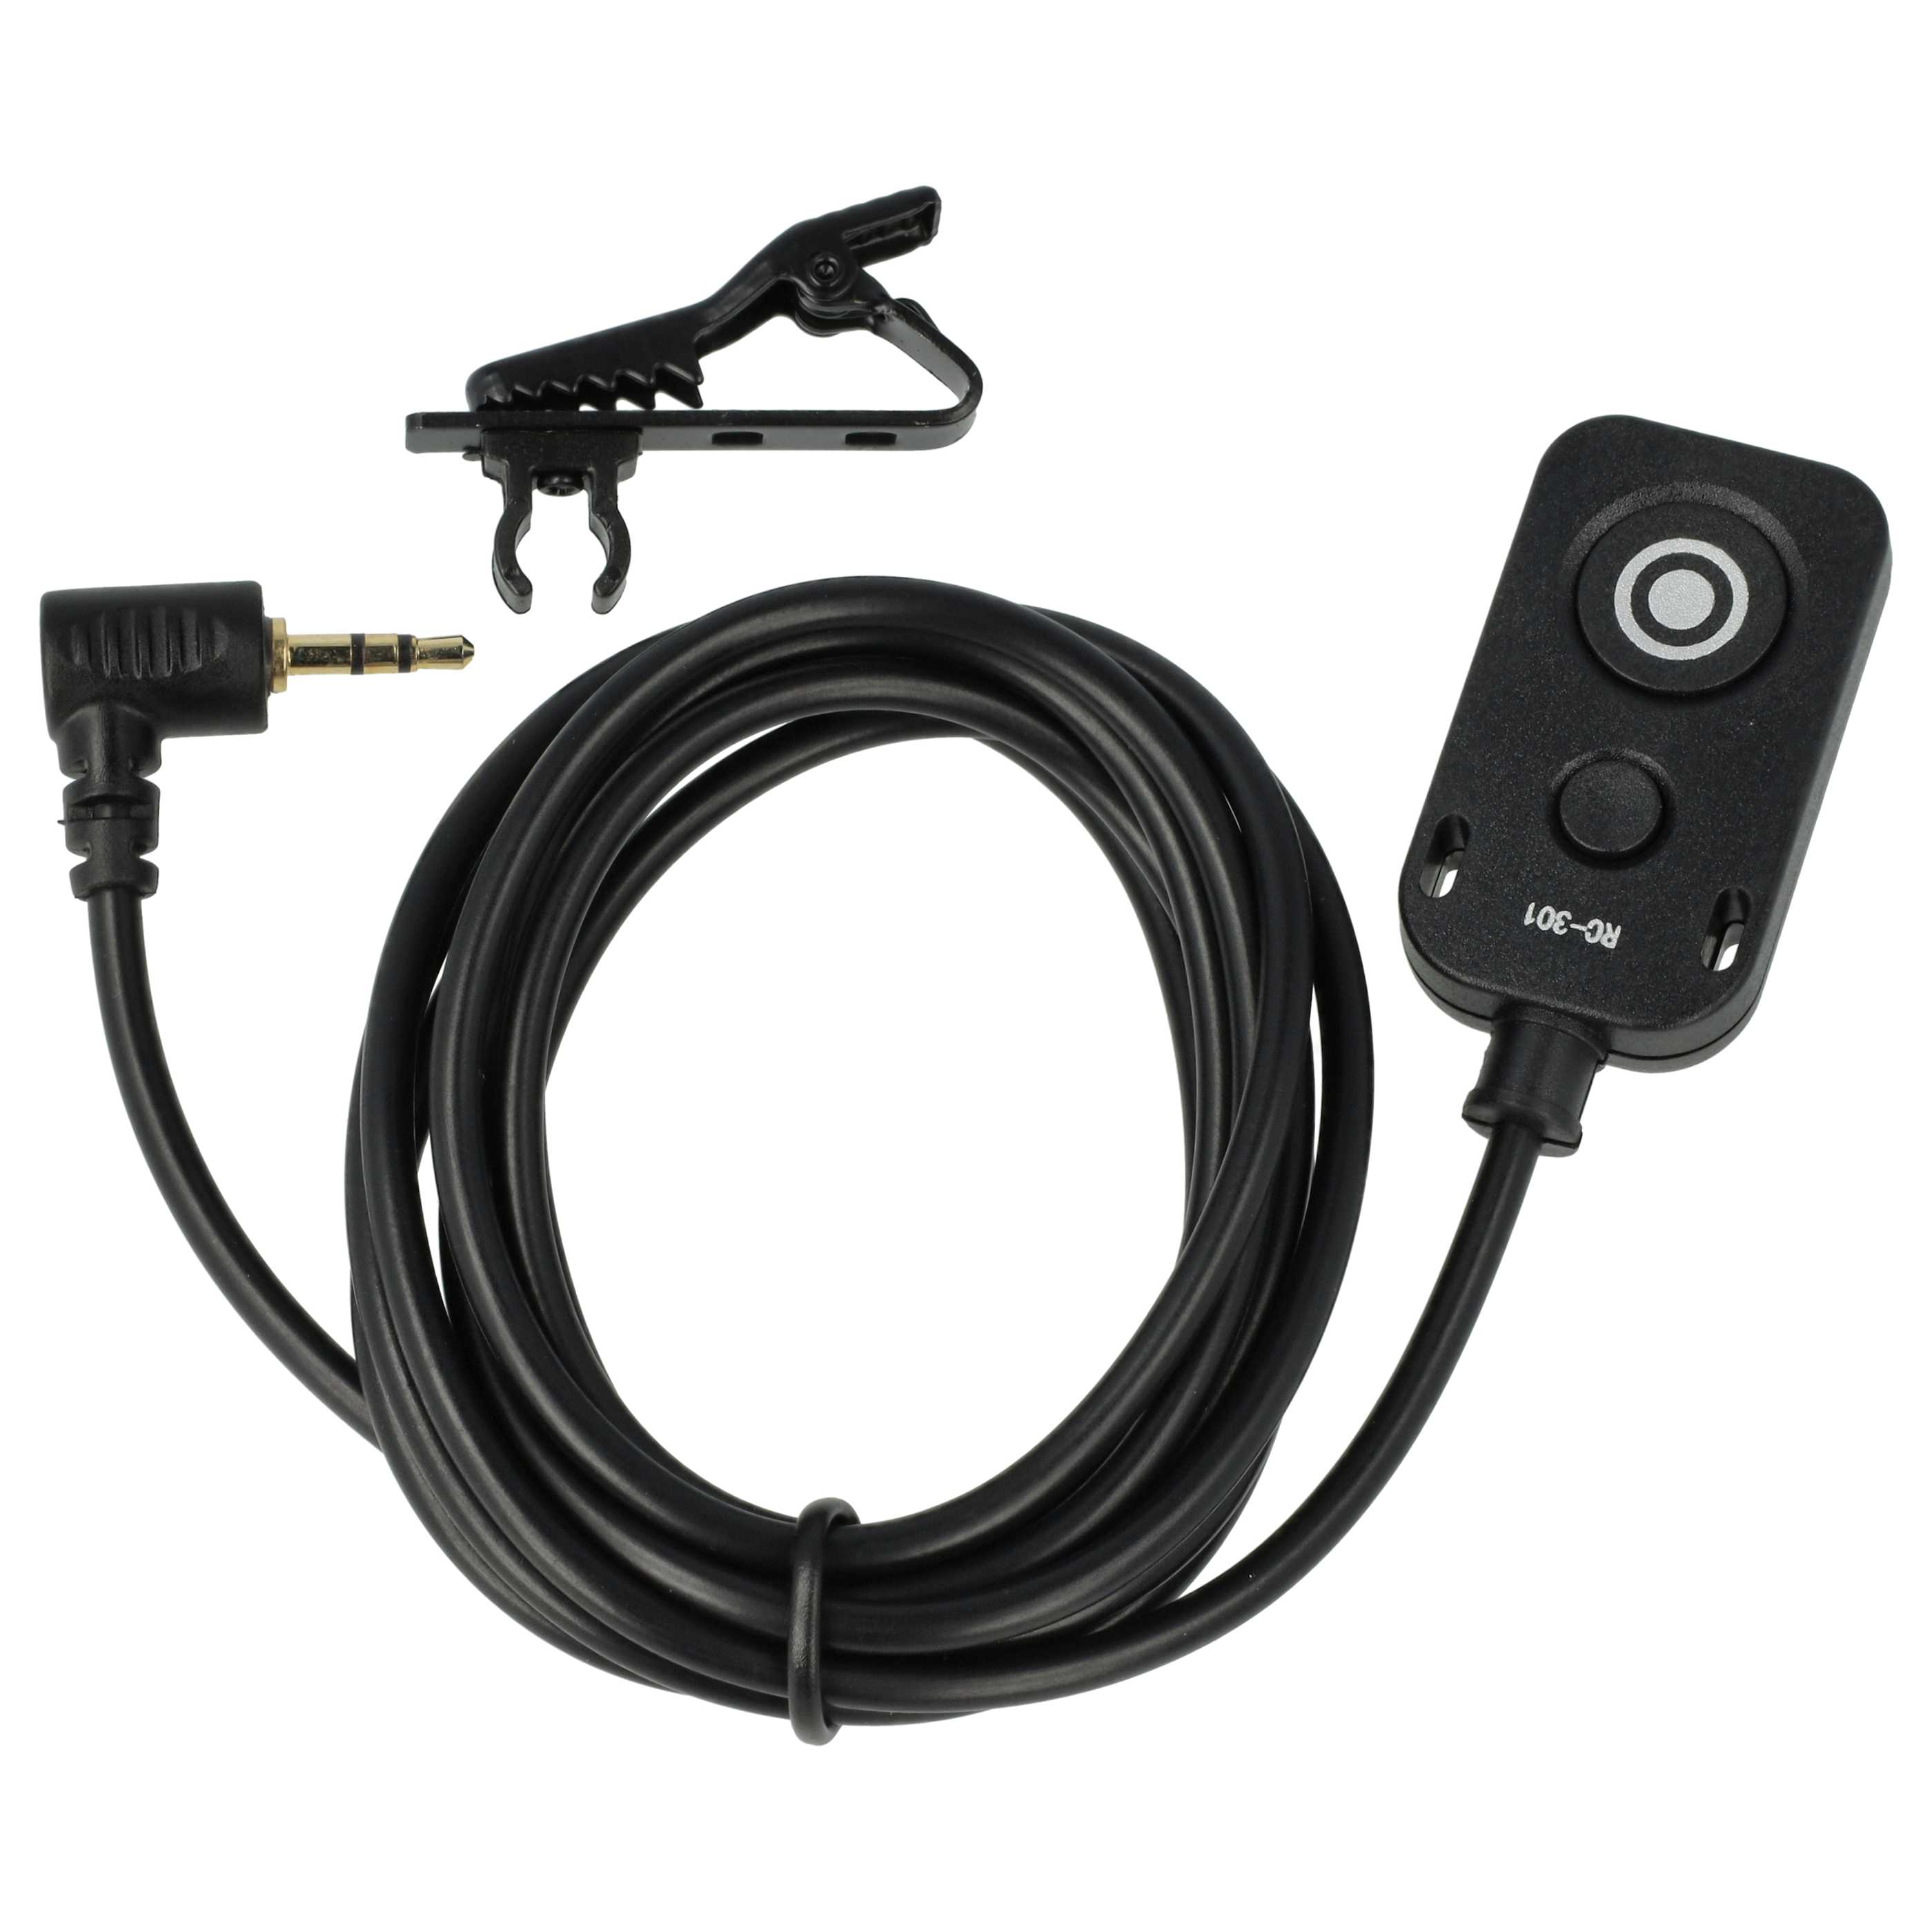 Remote Trigger as Exchange for Panasonic RC-201/L1, RC201-L1 for Camera etc. 1.5 m Lead